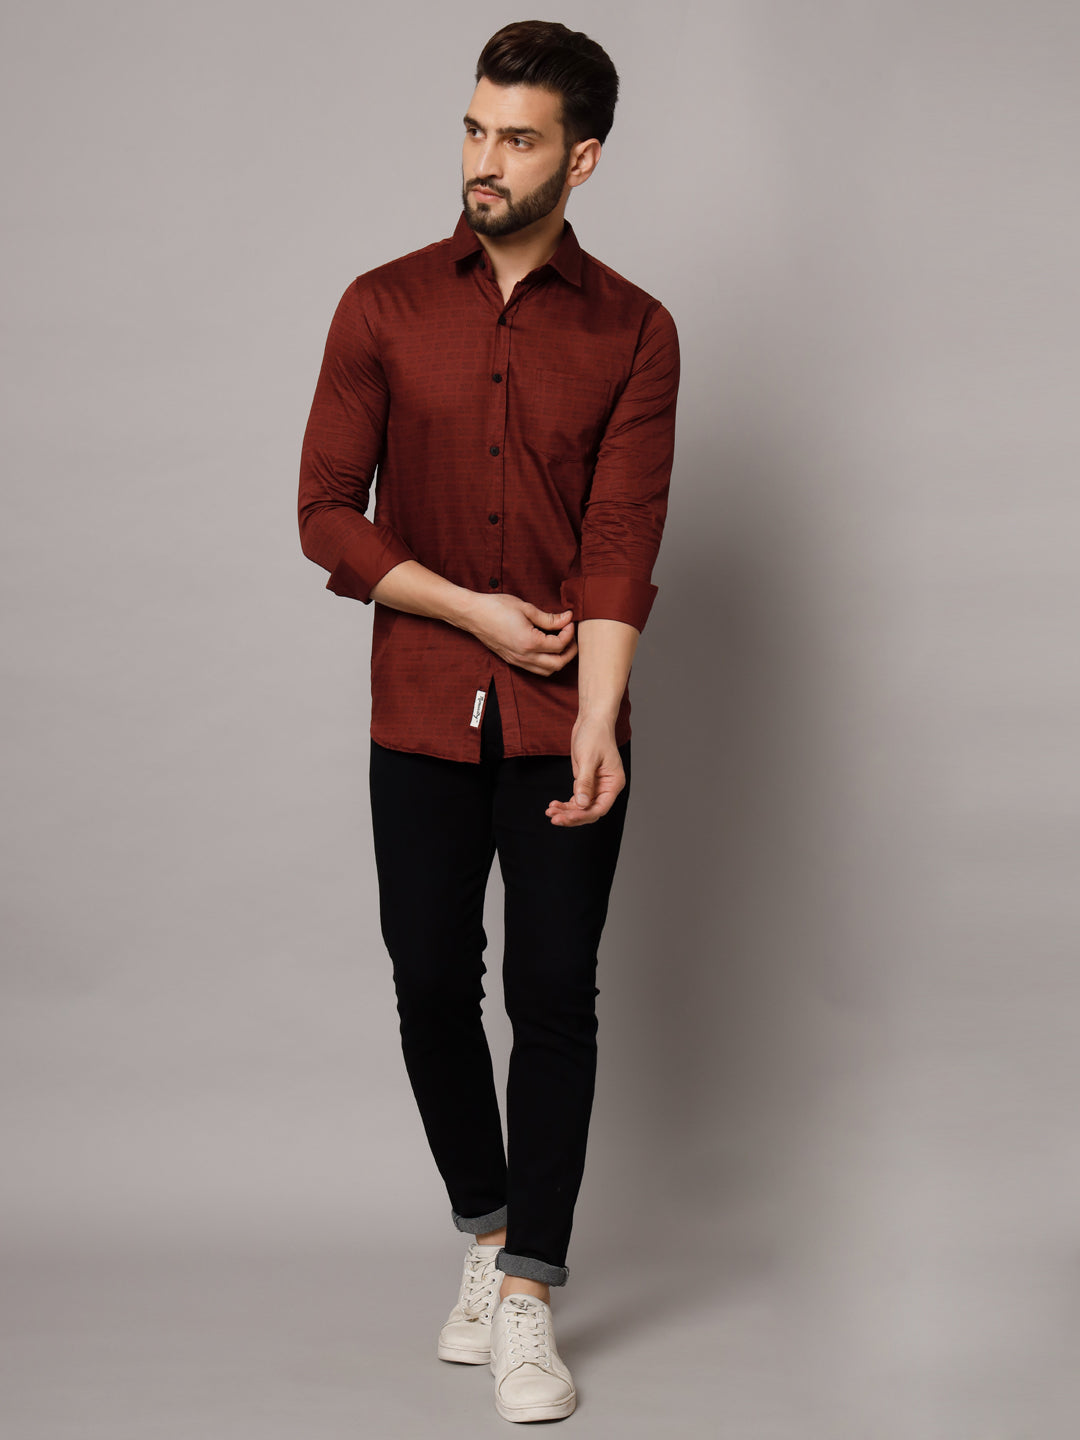 What Color Shirt Goes With Red Pants - 8 Style Rules You Need To Know |  Mens fashion blazer, Red pants men, Burgundy pants men